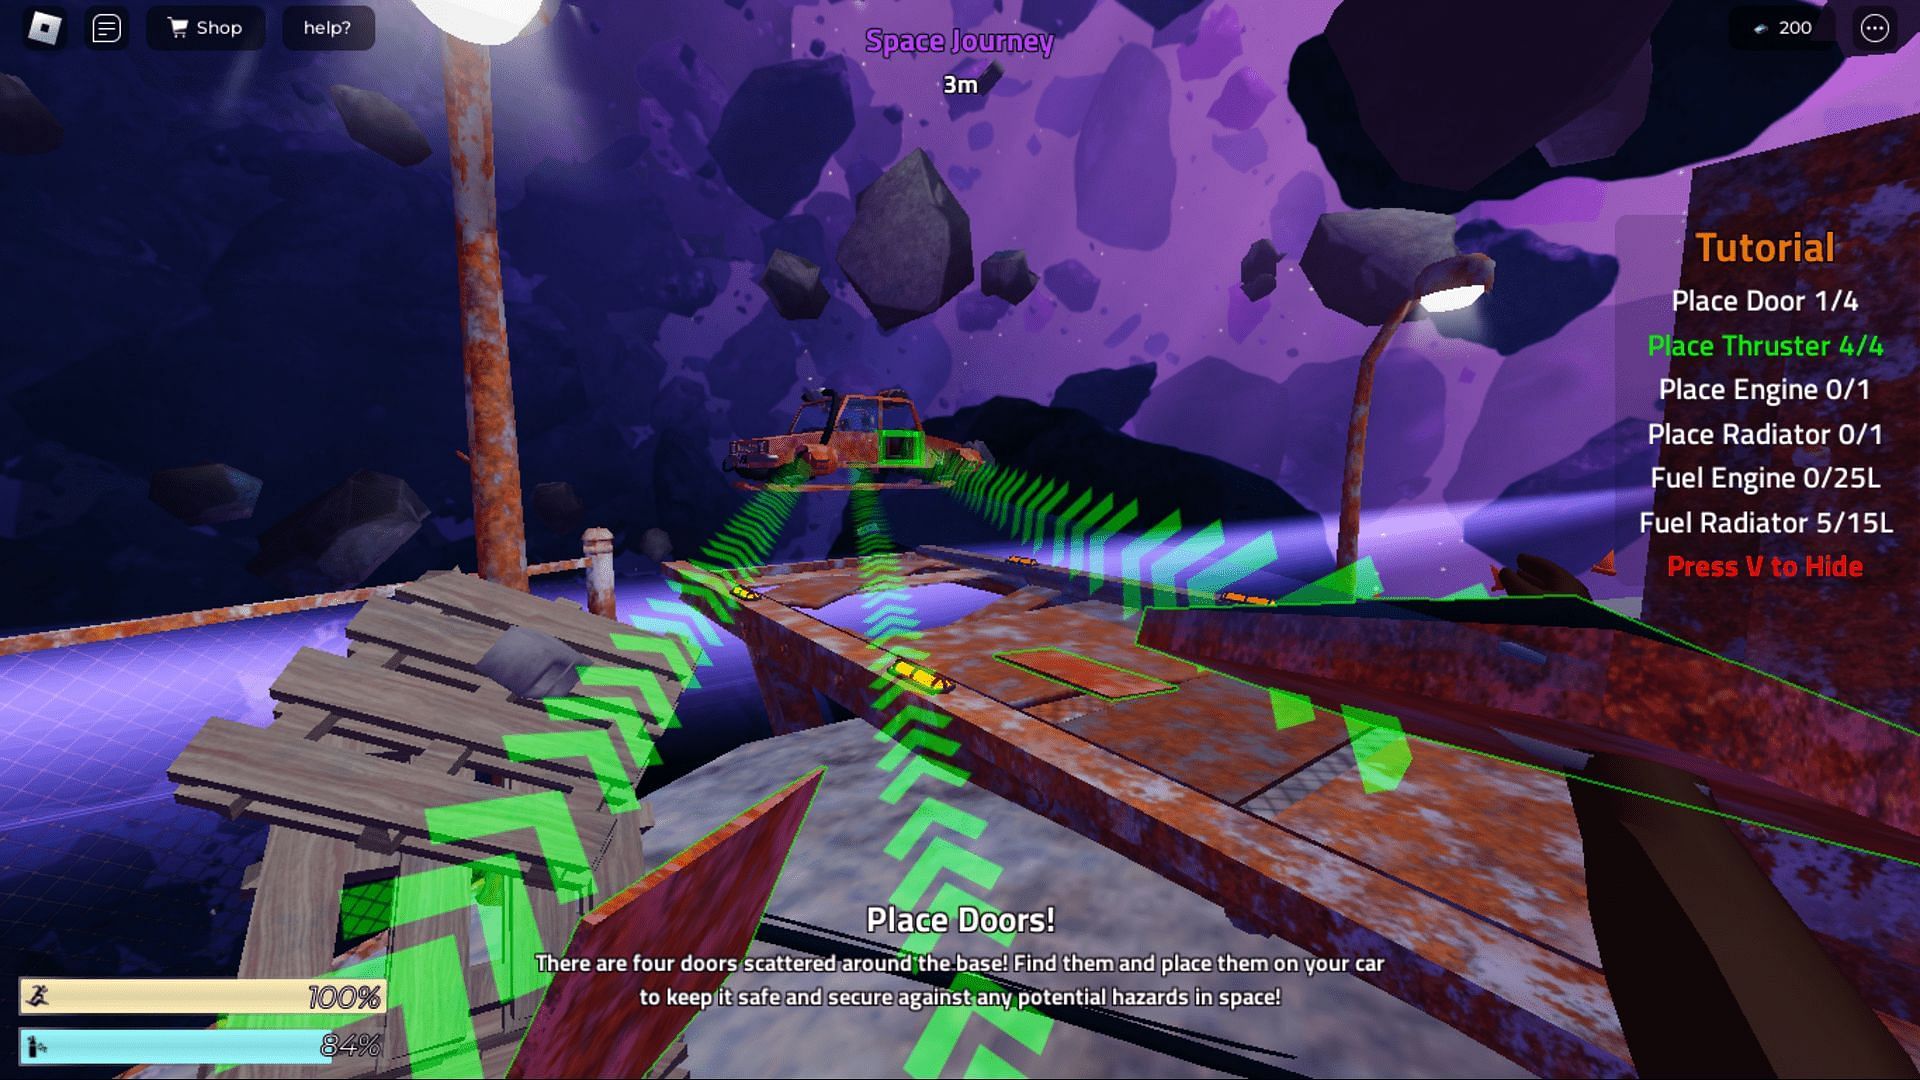 Gameplay screenshot from the game (Image via Roblox)